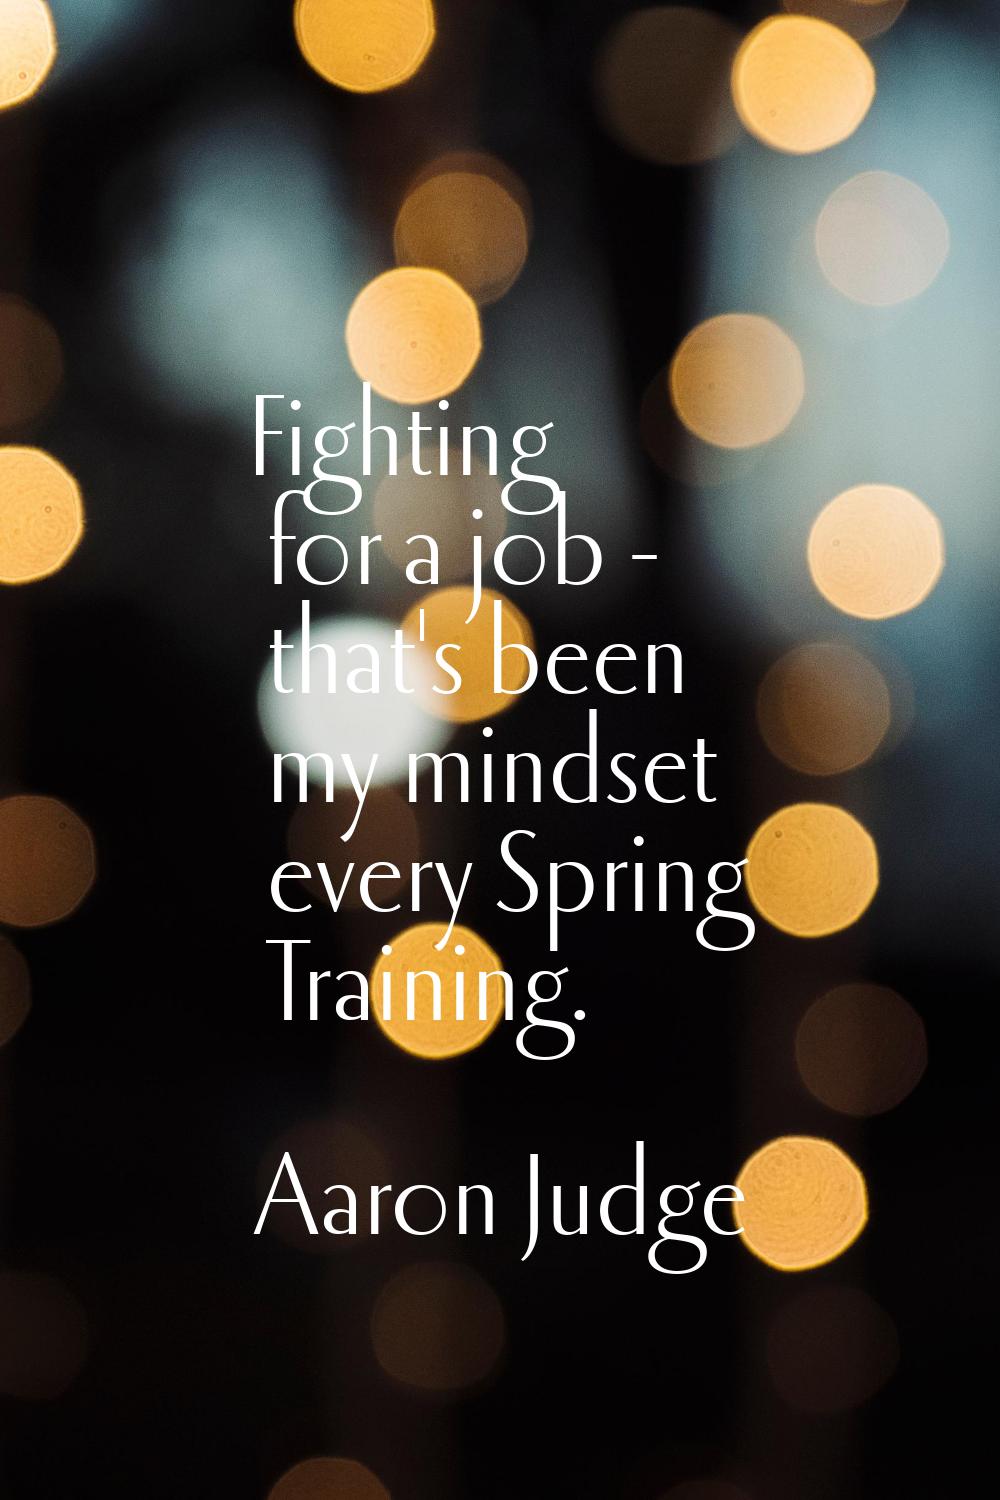 Fighting for a job - that's been my mindset every Spring Training.